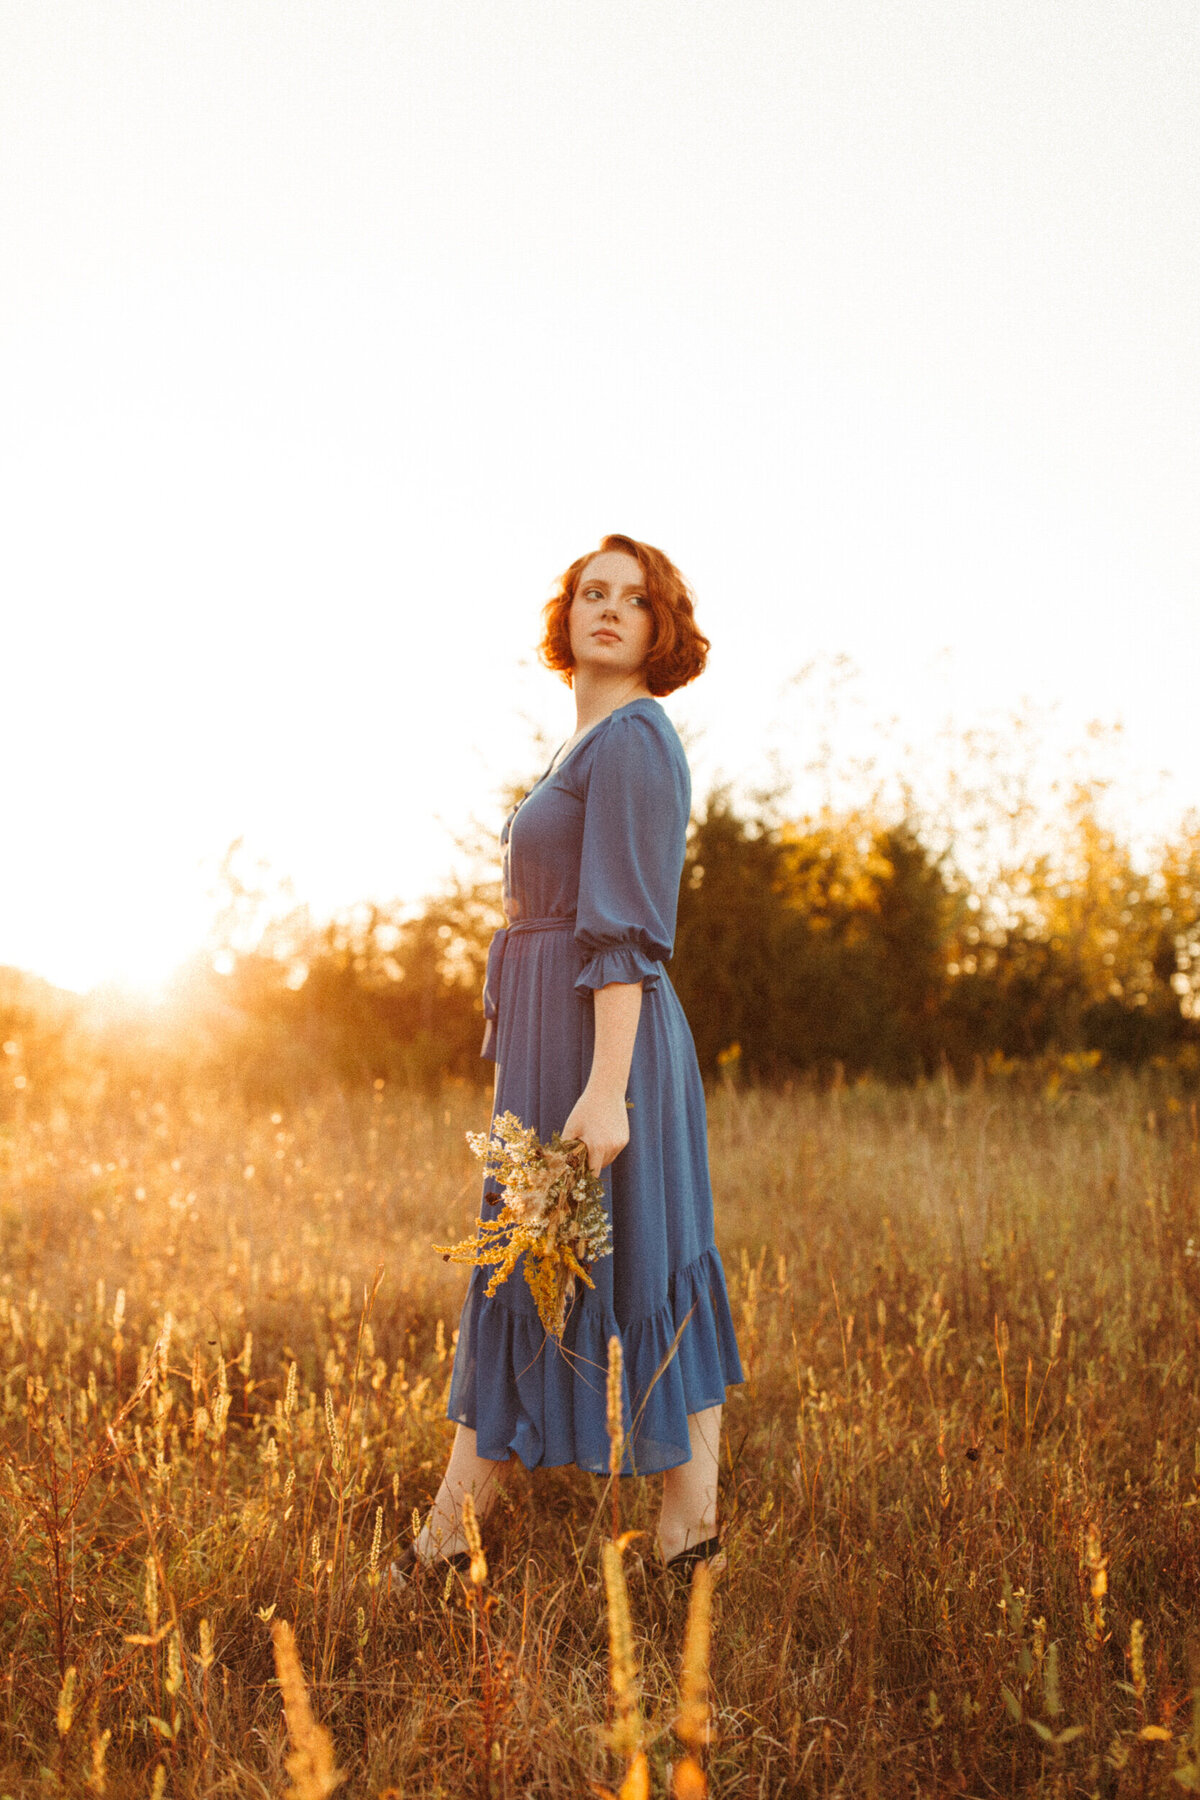 High school senior in blue dress holding a bundle of wildflowers and walking in a field